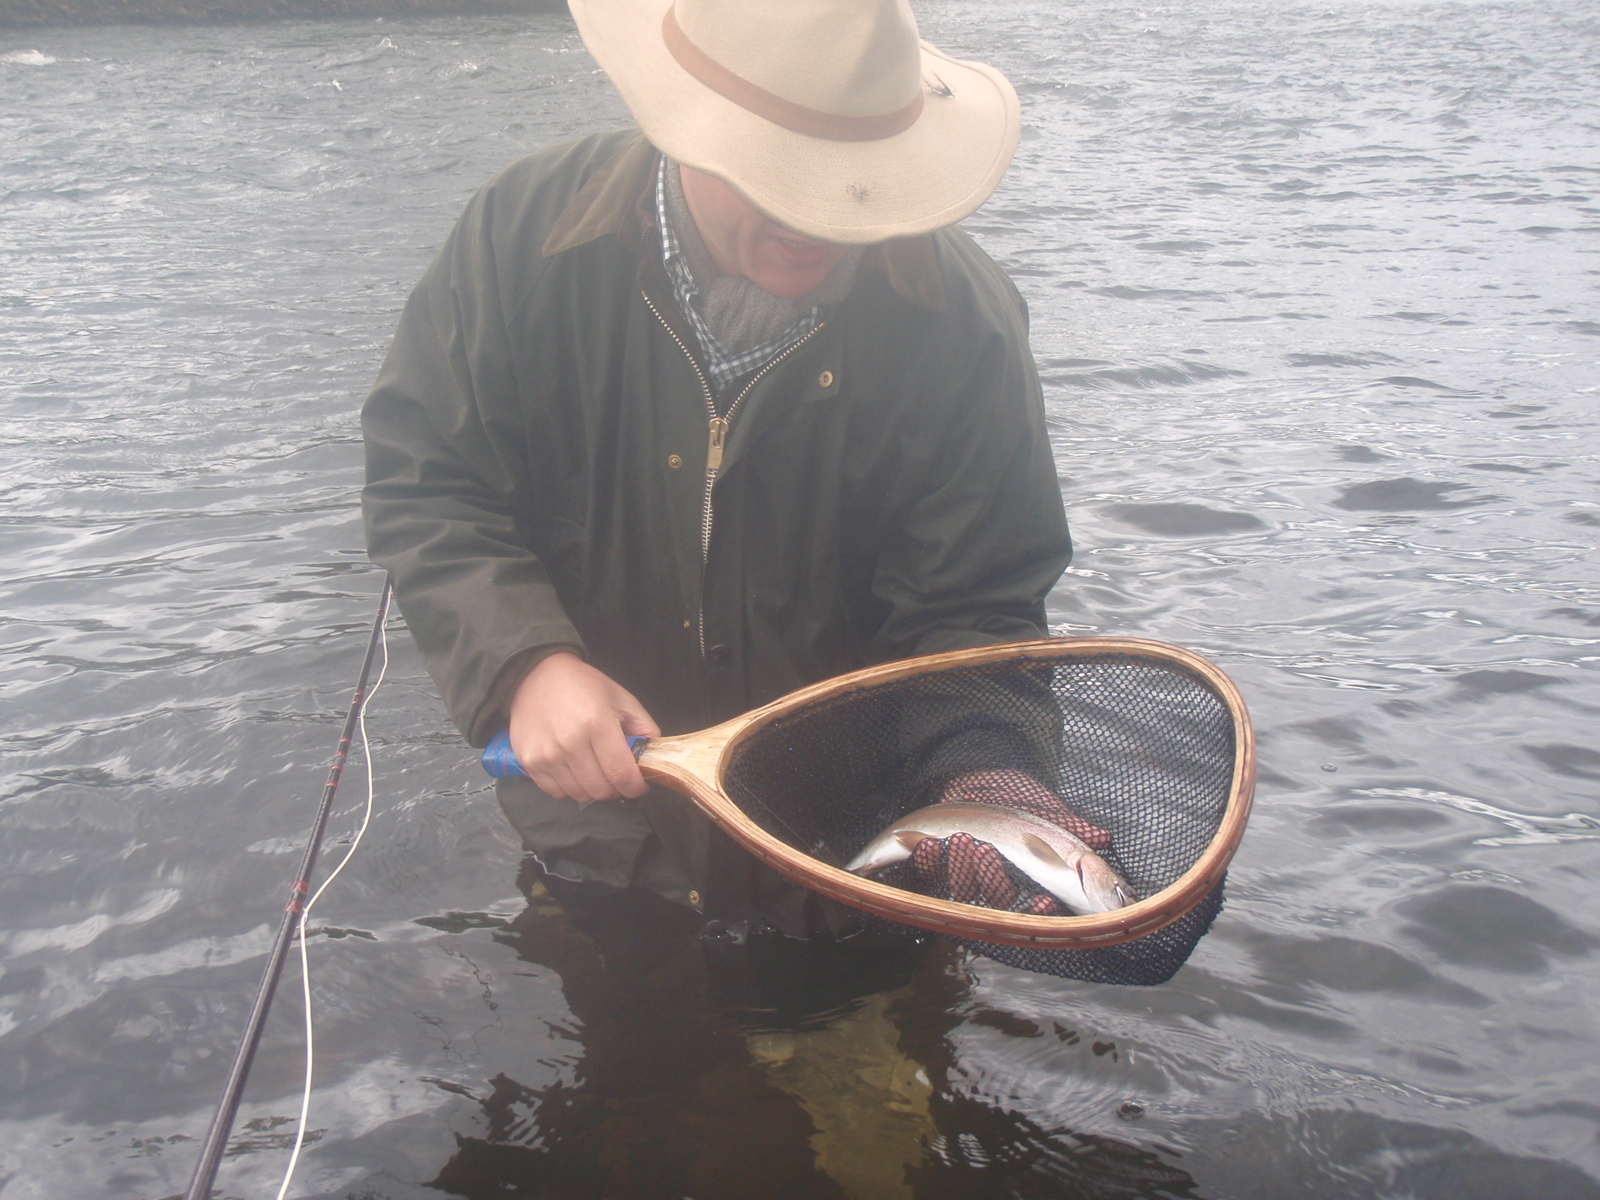 Androscoggin River Photos  Guided Fly Fishing Trips : New